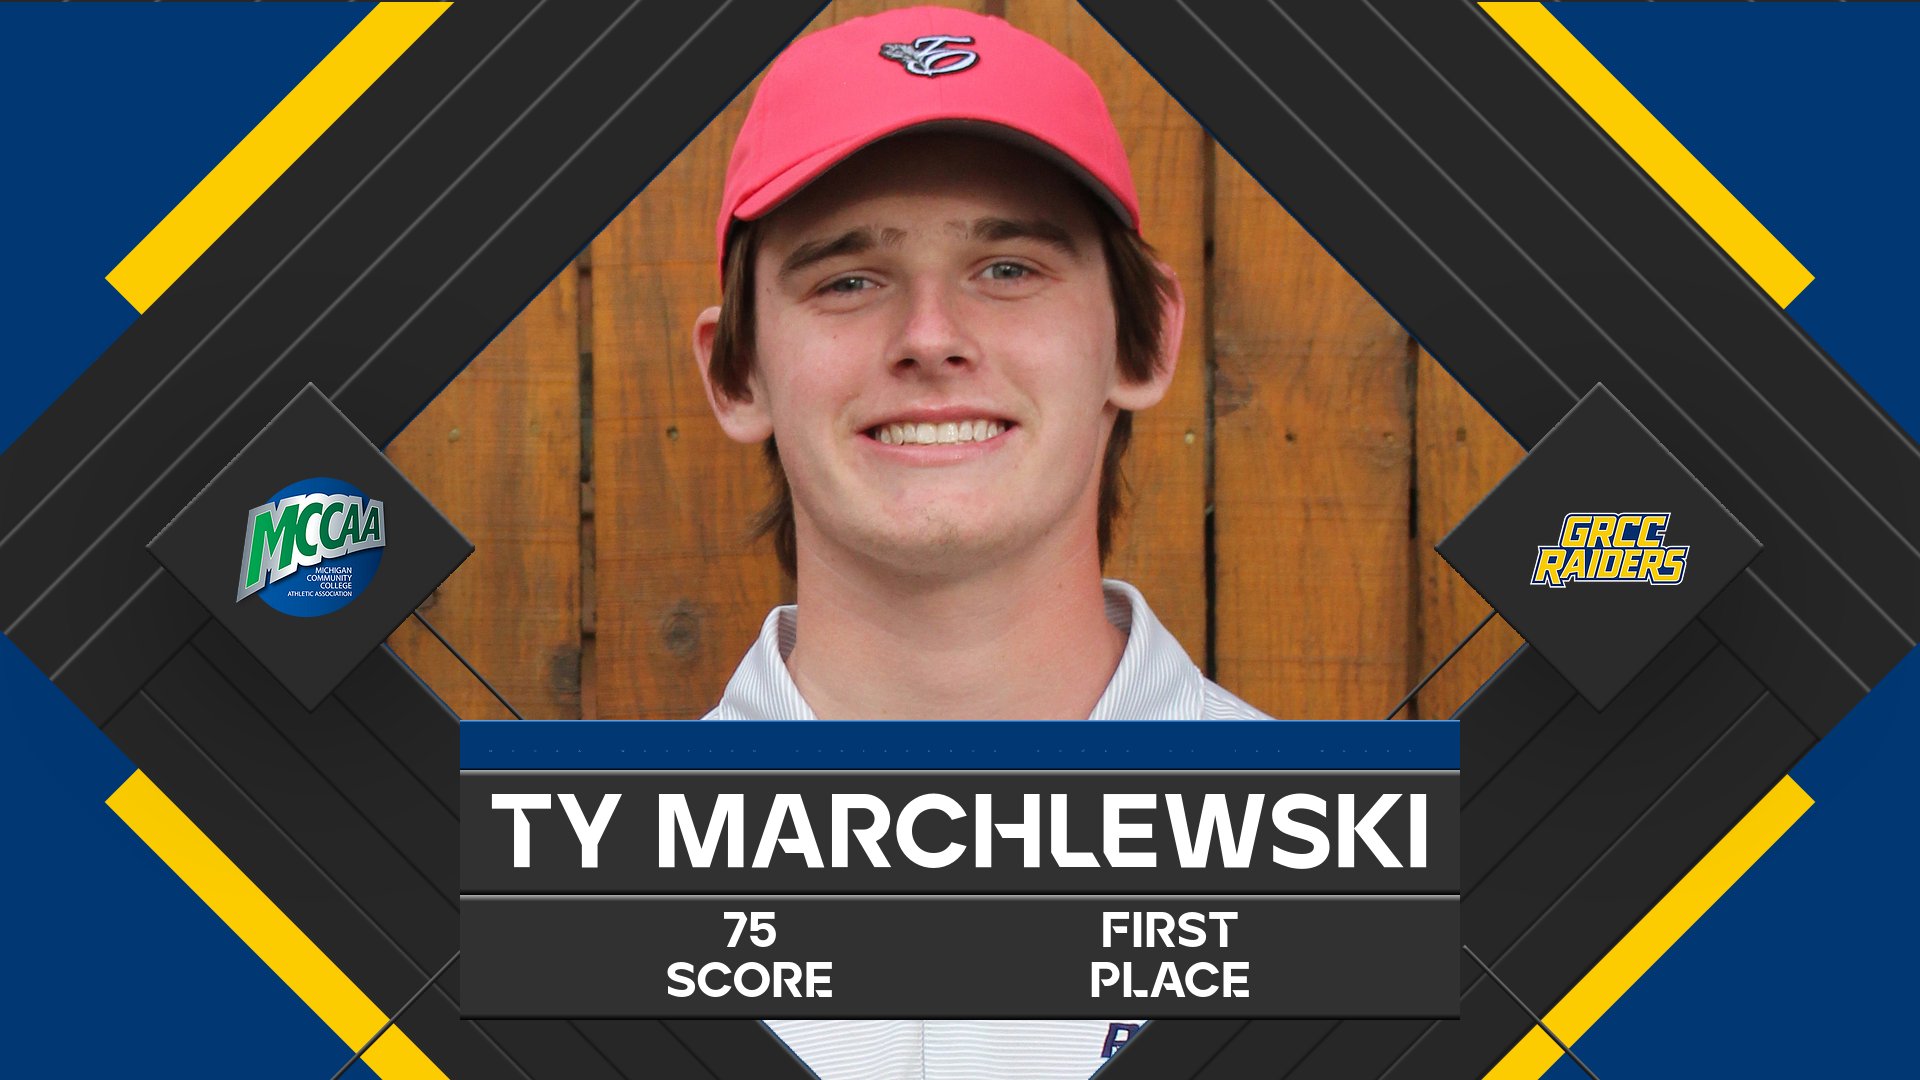 GRCC's Ty Marchlewski Earns MCCAA Western Conference Golfer of the Week Honors